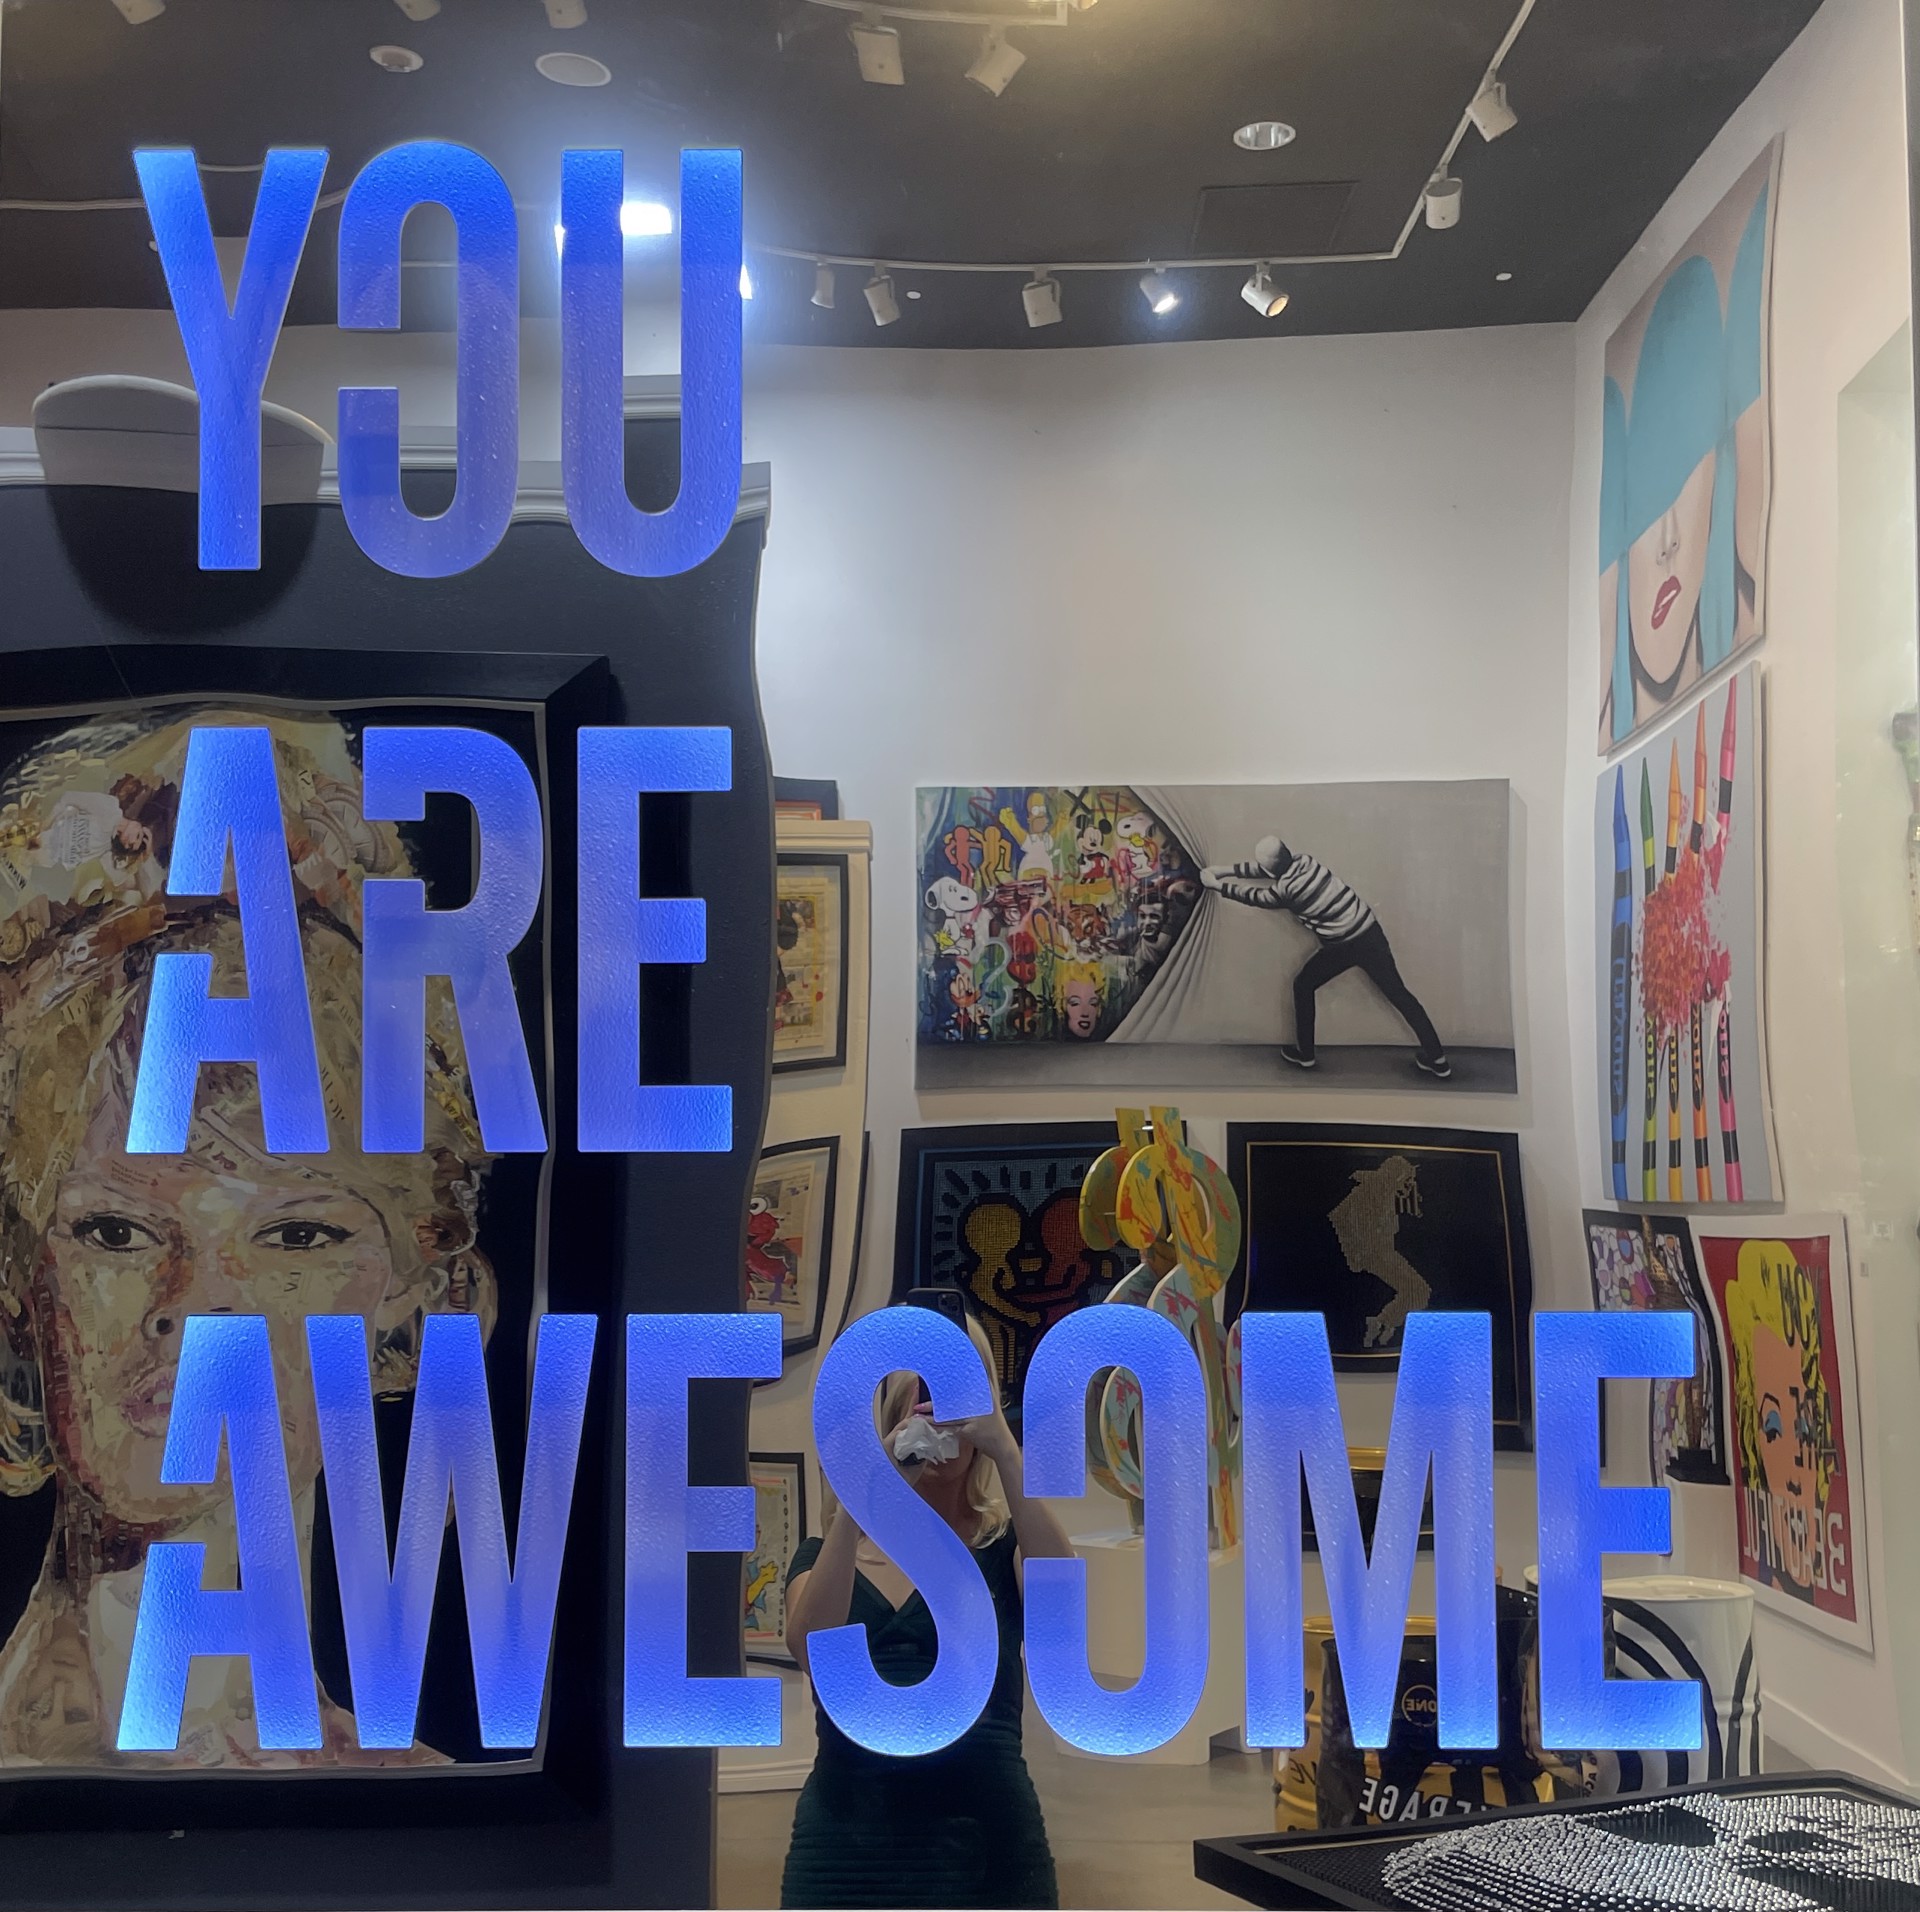 “You Are Awesome” by Affirmative Mirrors Installation by Elena Bulatova